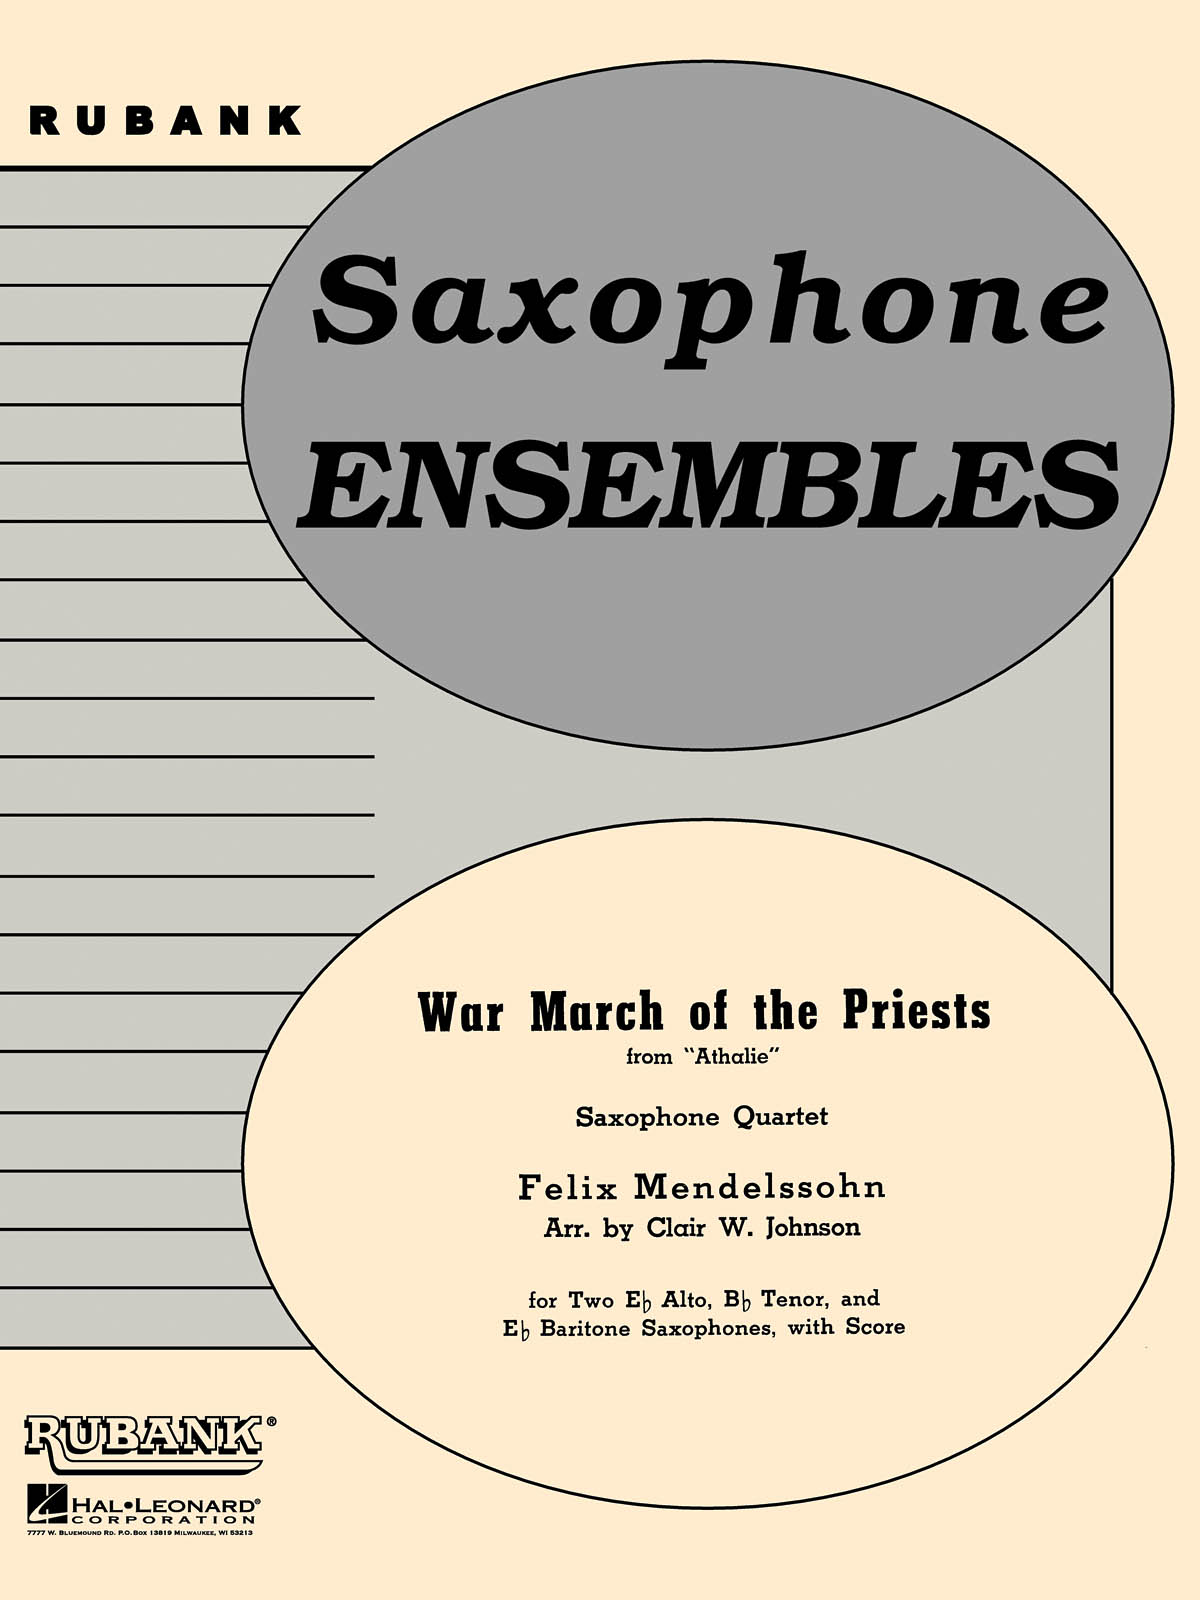 Felix Mendelssohn Bartholdy: War March of the Priests (from Athalie): Saxophone